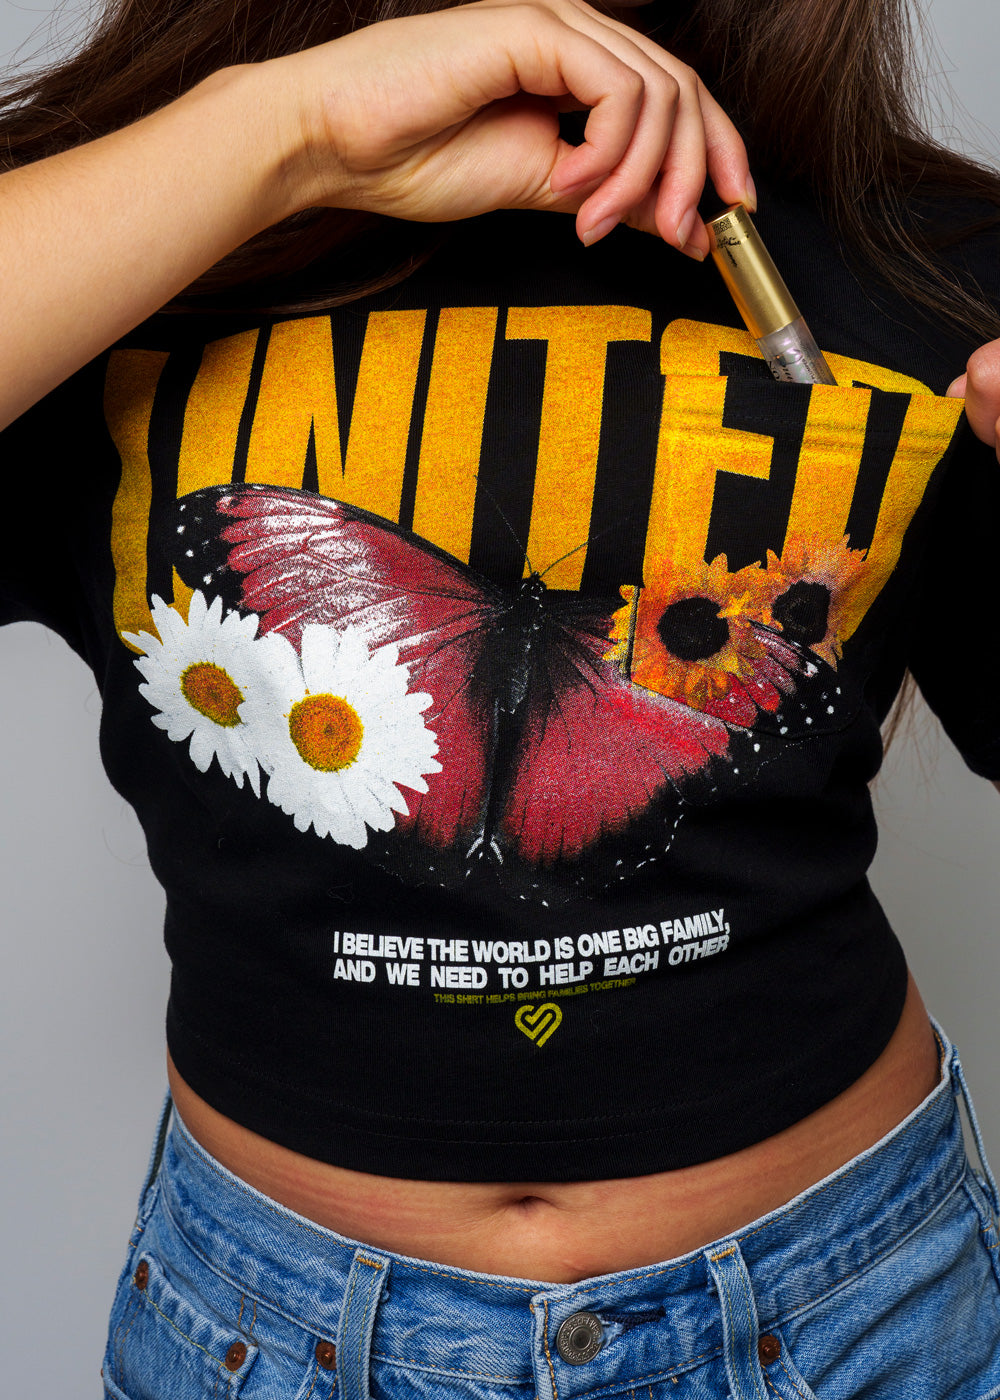 The "United" Crop